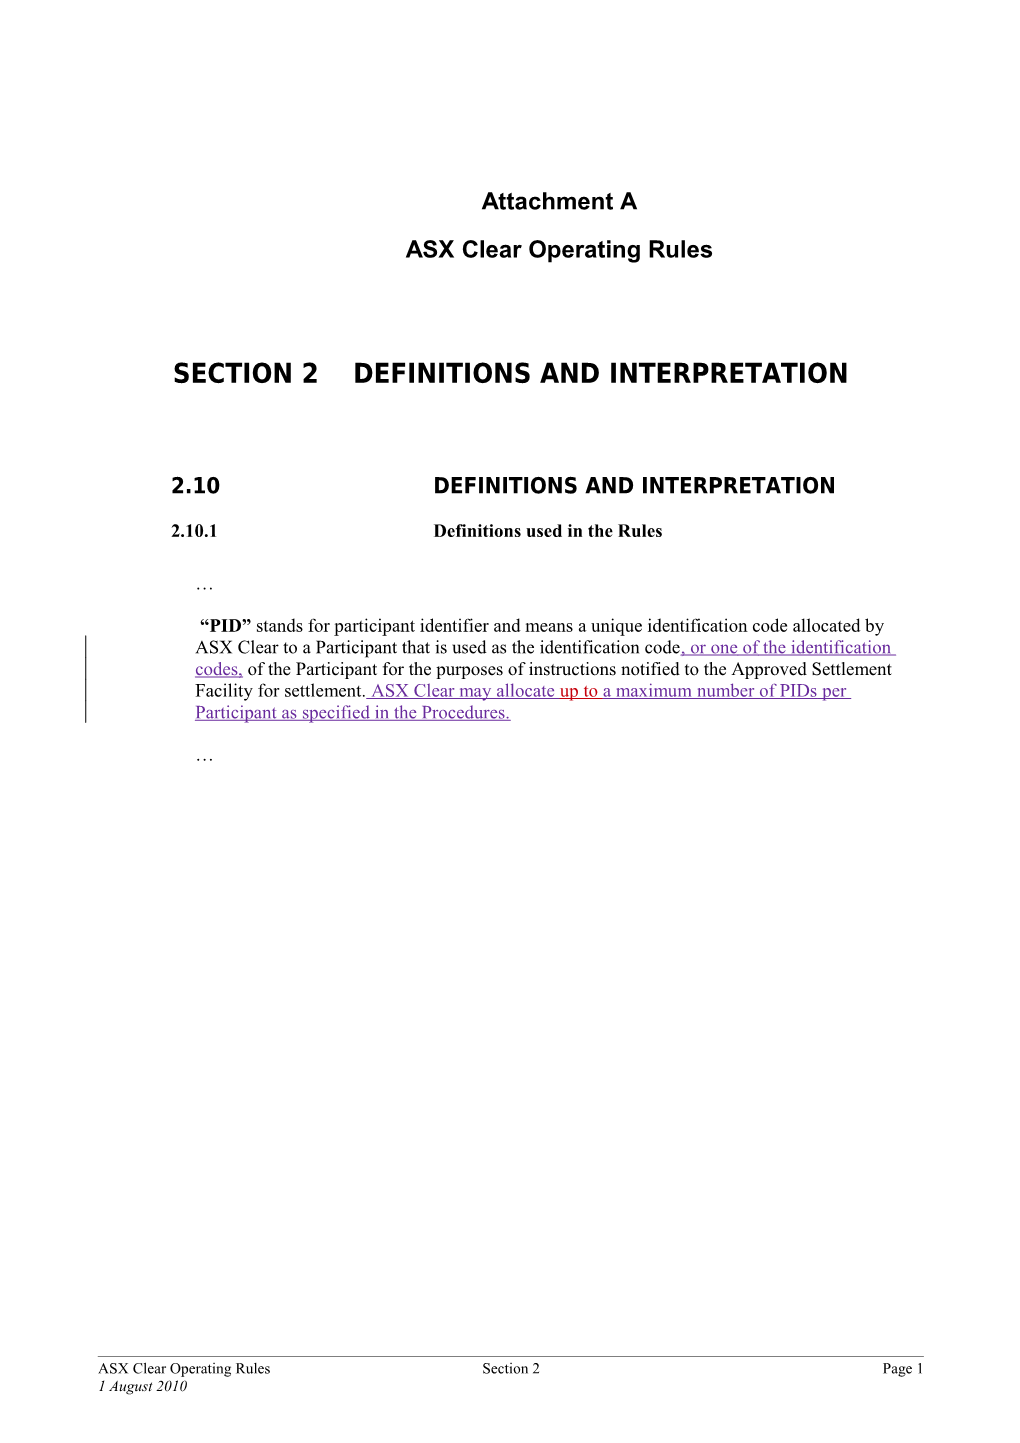 ASX Clear Section 12 - Registration, Novation, Netting and Settlement